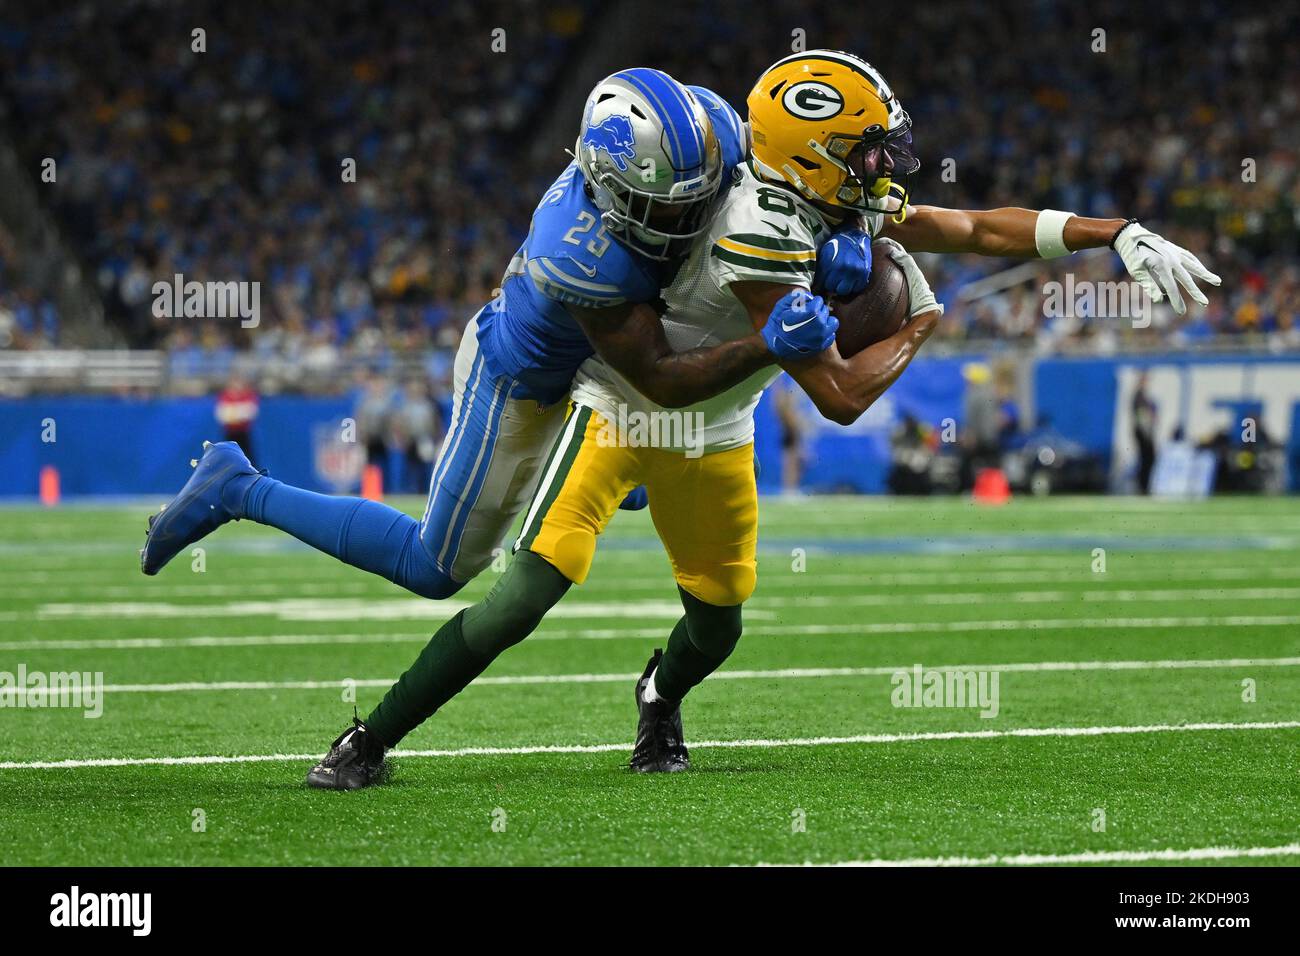 DETROIT, MI - NOVEMBER 06: Detroit Lions Safety (25) Will Harris wraps up Green Bay Packers WR Samori Toure (83) during the game between Green Bay Packers and Detroit Lions on November 6, 2022 in Detroit, MI (Photo by Allan Dranberg/CSM) Credit: Cal Sport Media/Alamy Live News Stock Photo